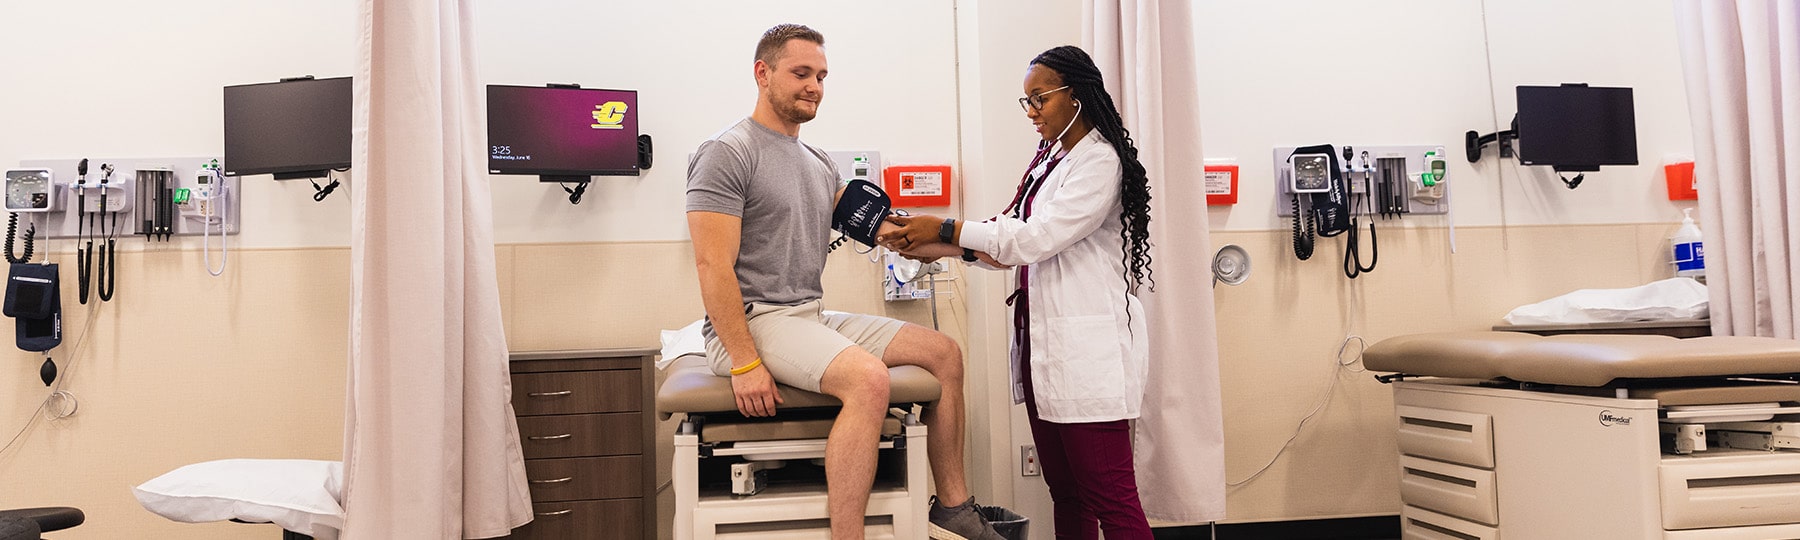 A Central Michigan University physician assistant student stands next to another student to practice taking their blood pressure using a stethoscope and blood pressure cuff.